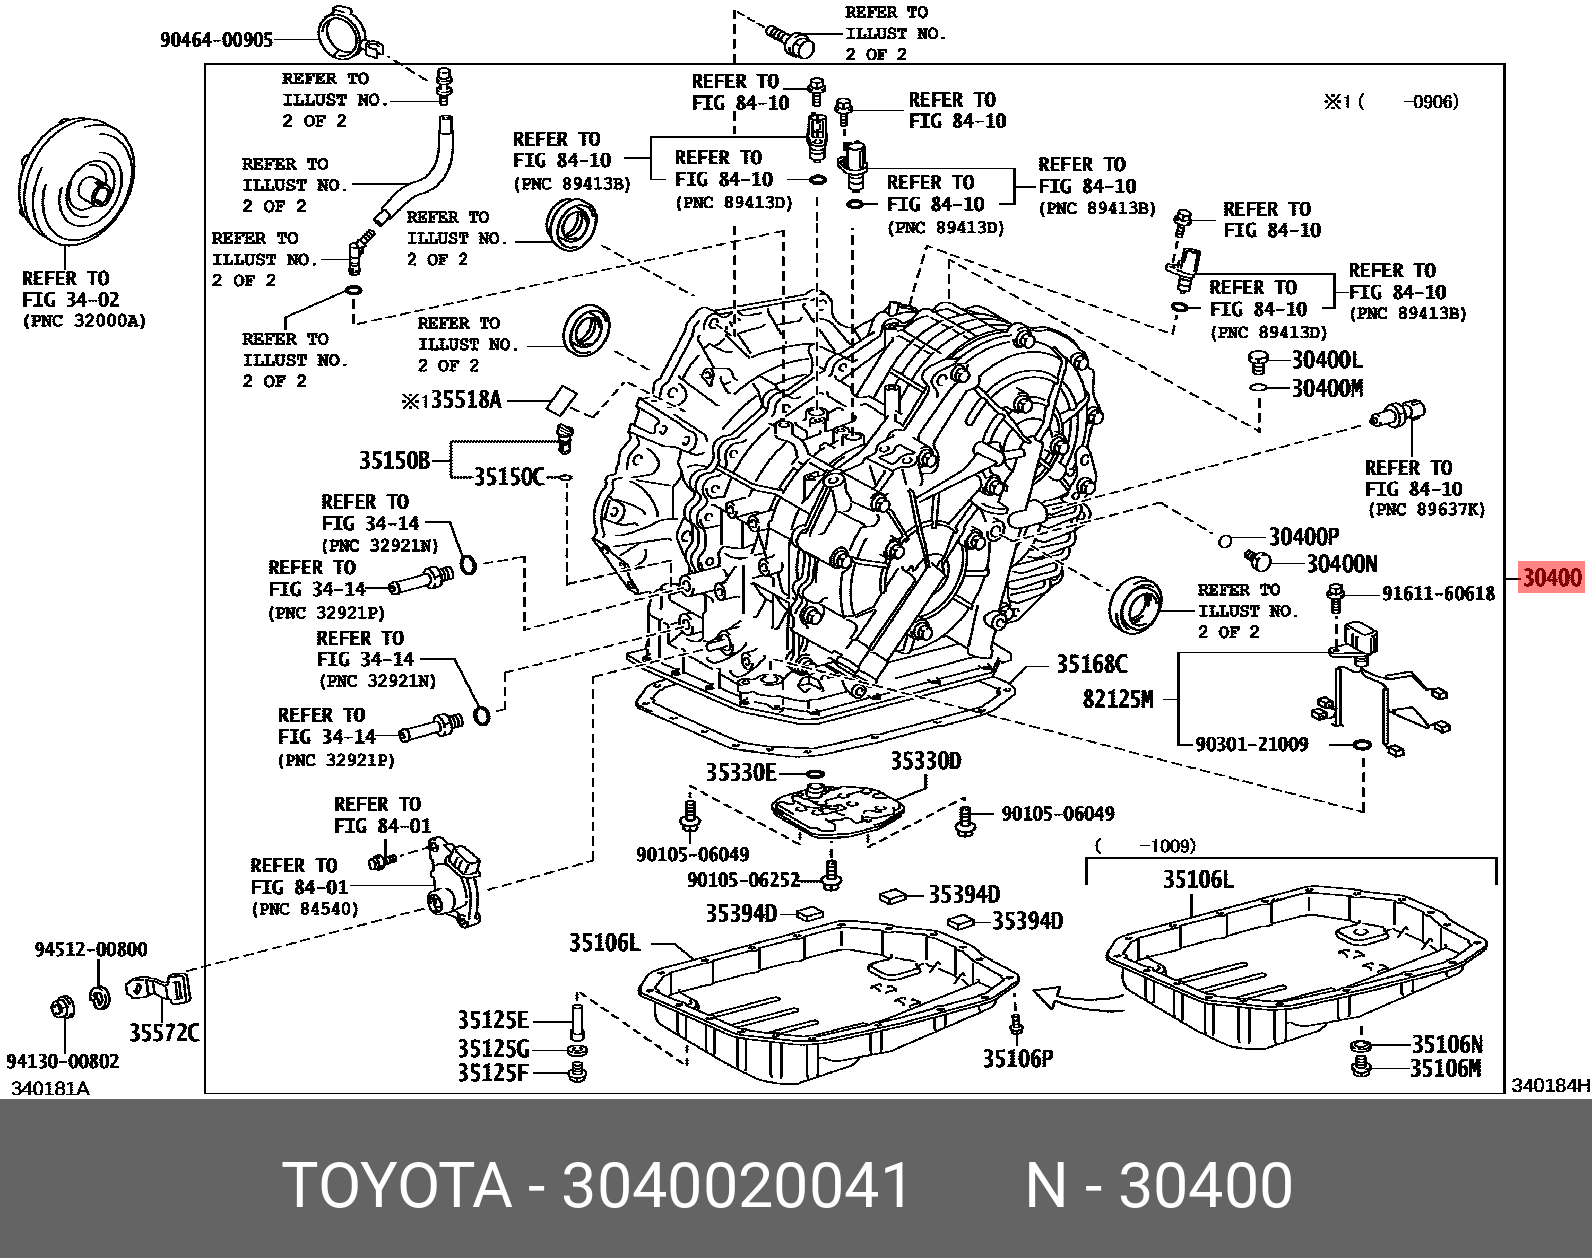 3040020041, WISH 200903-201711, ZGE2#, TRANSAXLE ASSY, CONTINUOUSLY VARIABLE